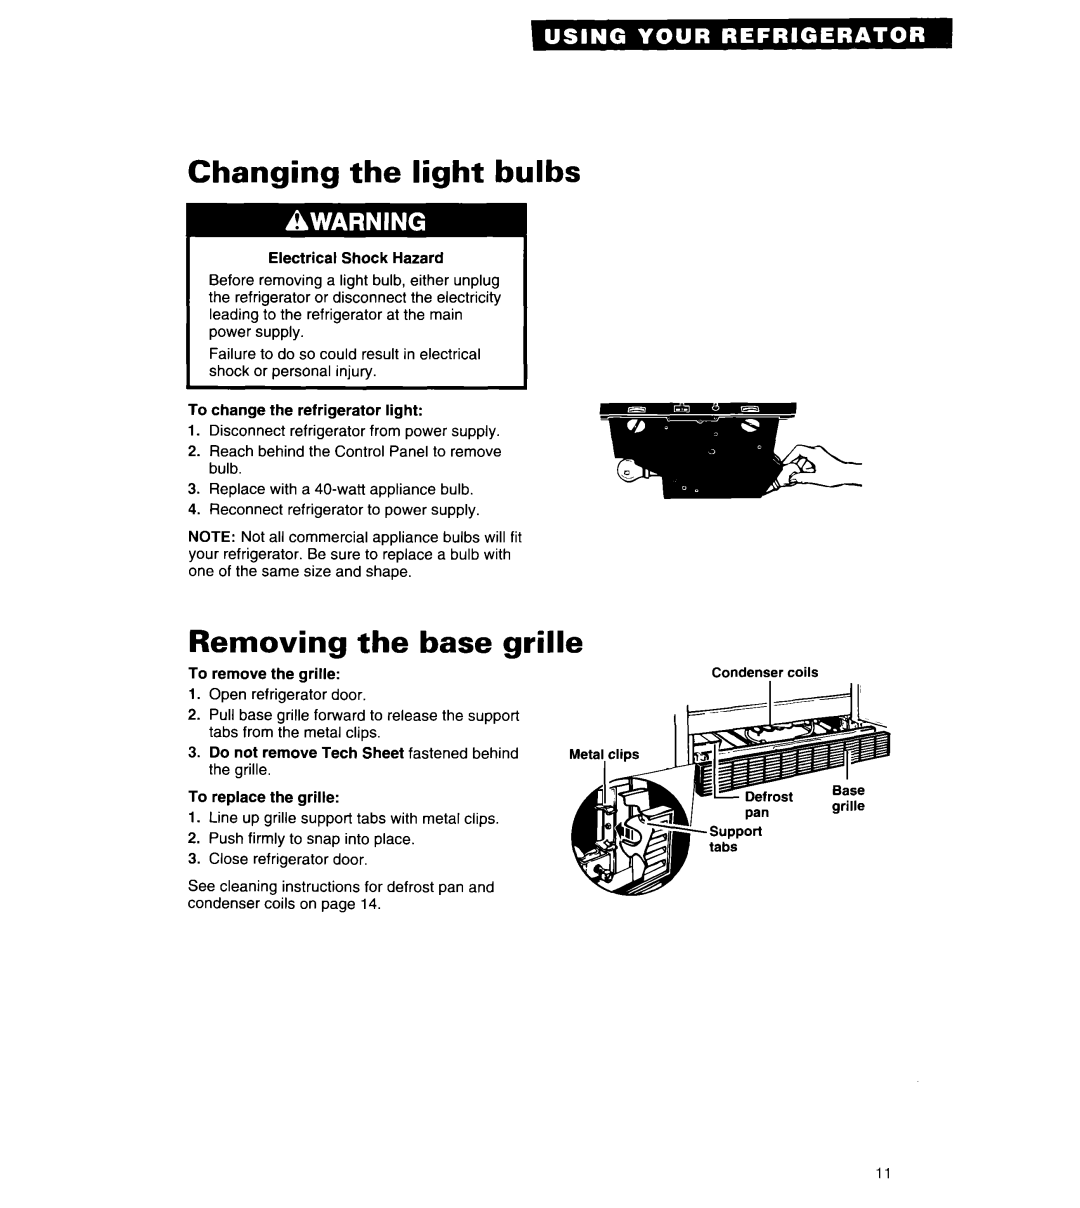 Whirlpool 6ET18ZK important safety instructions Changing the light bulbs, Removing the base grille 